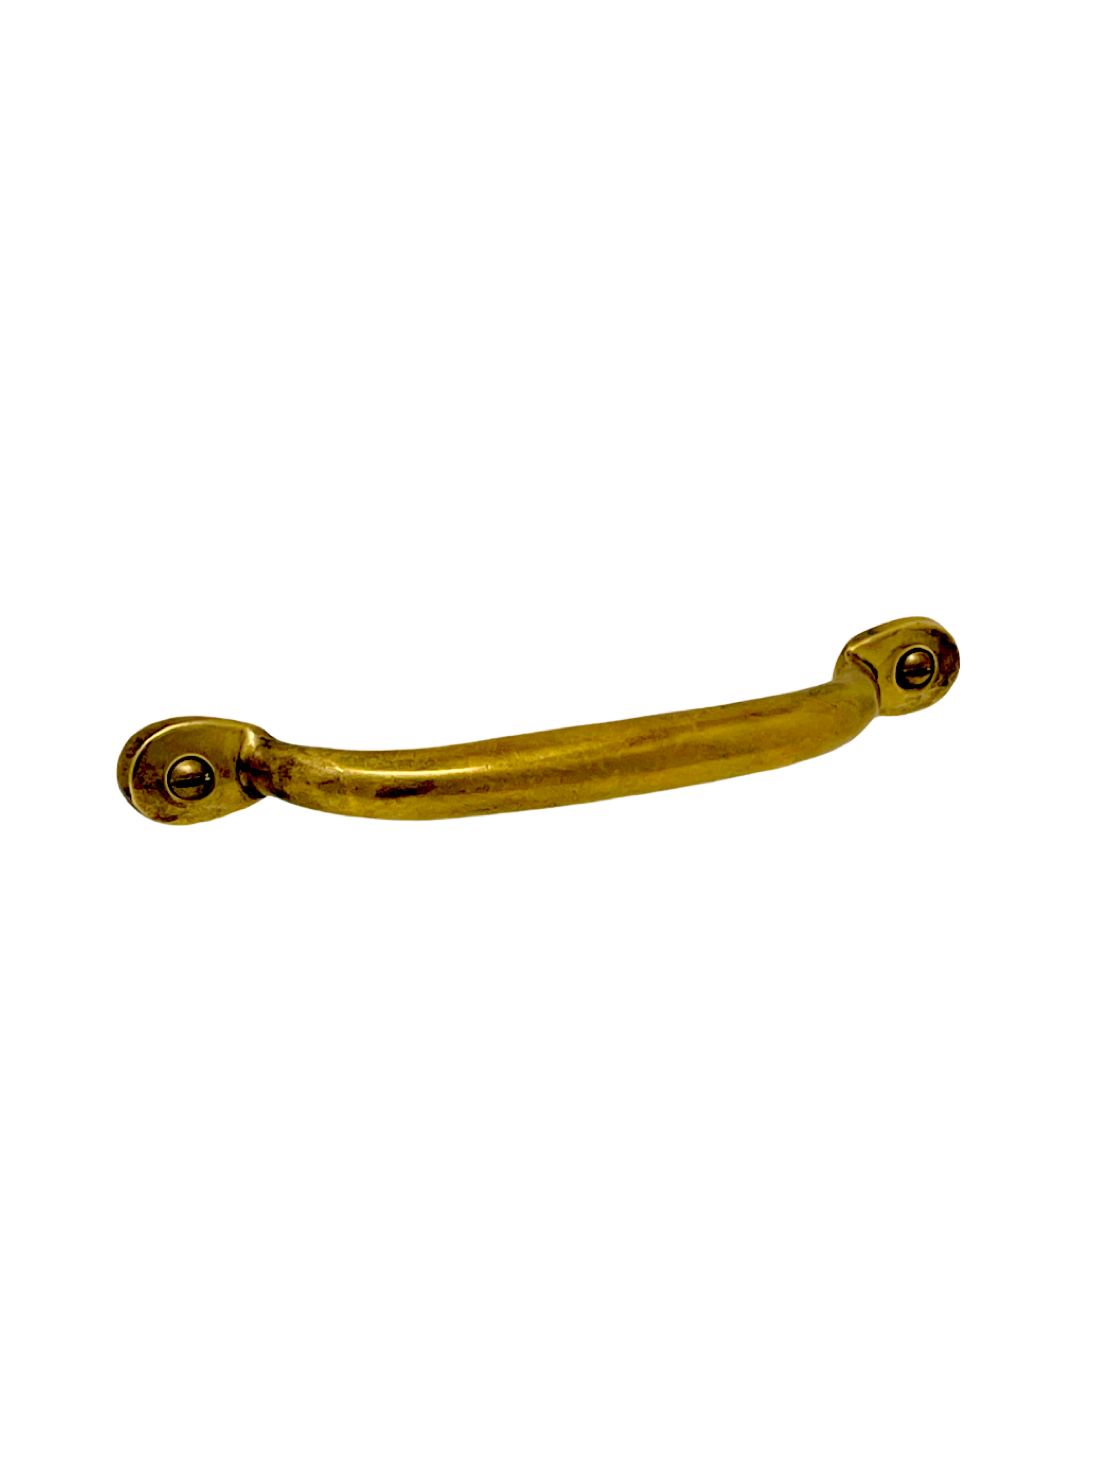 Brass drawer pull - Curved pull handle - Twisting handle